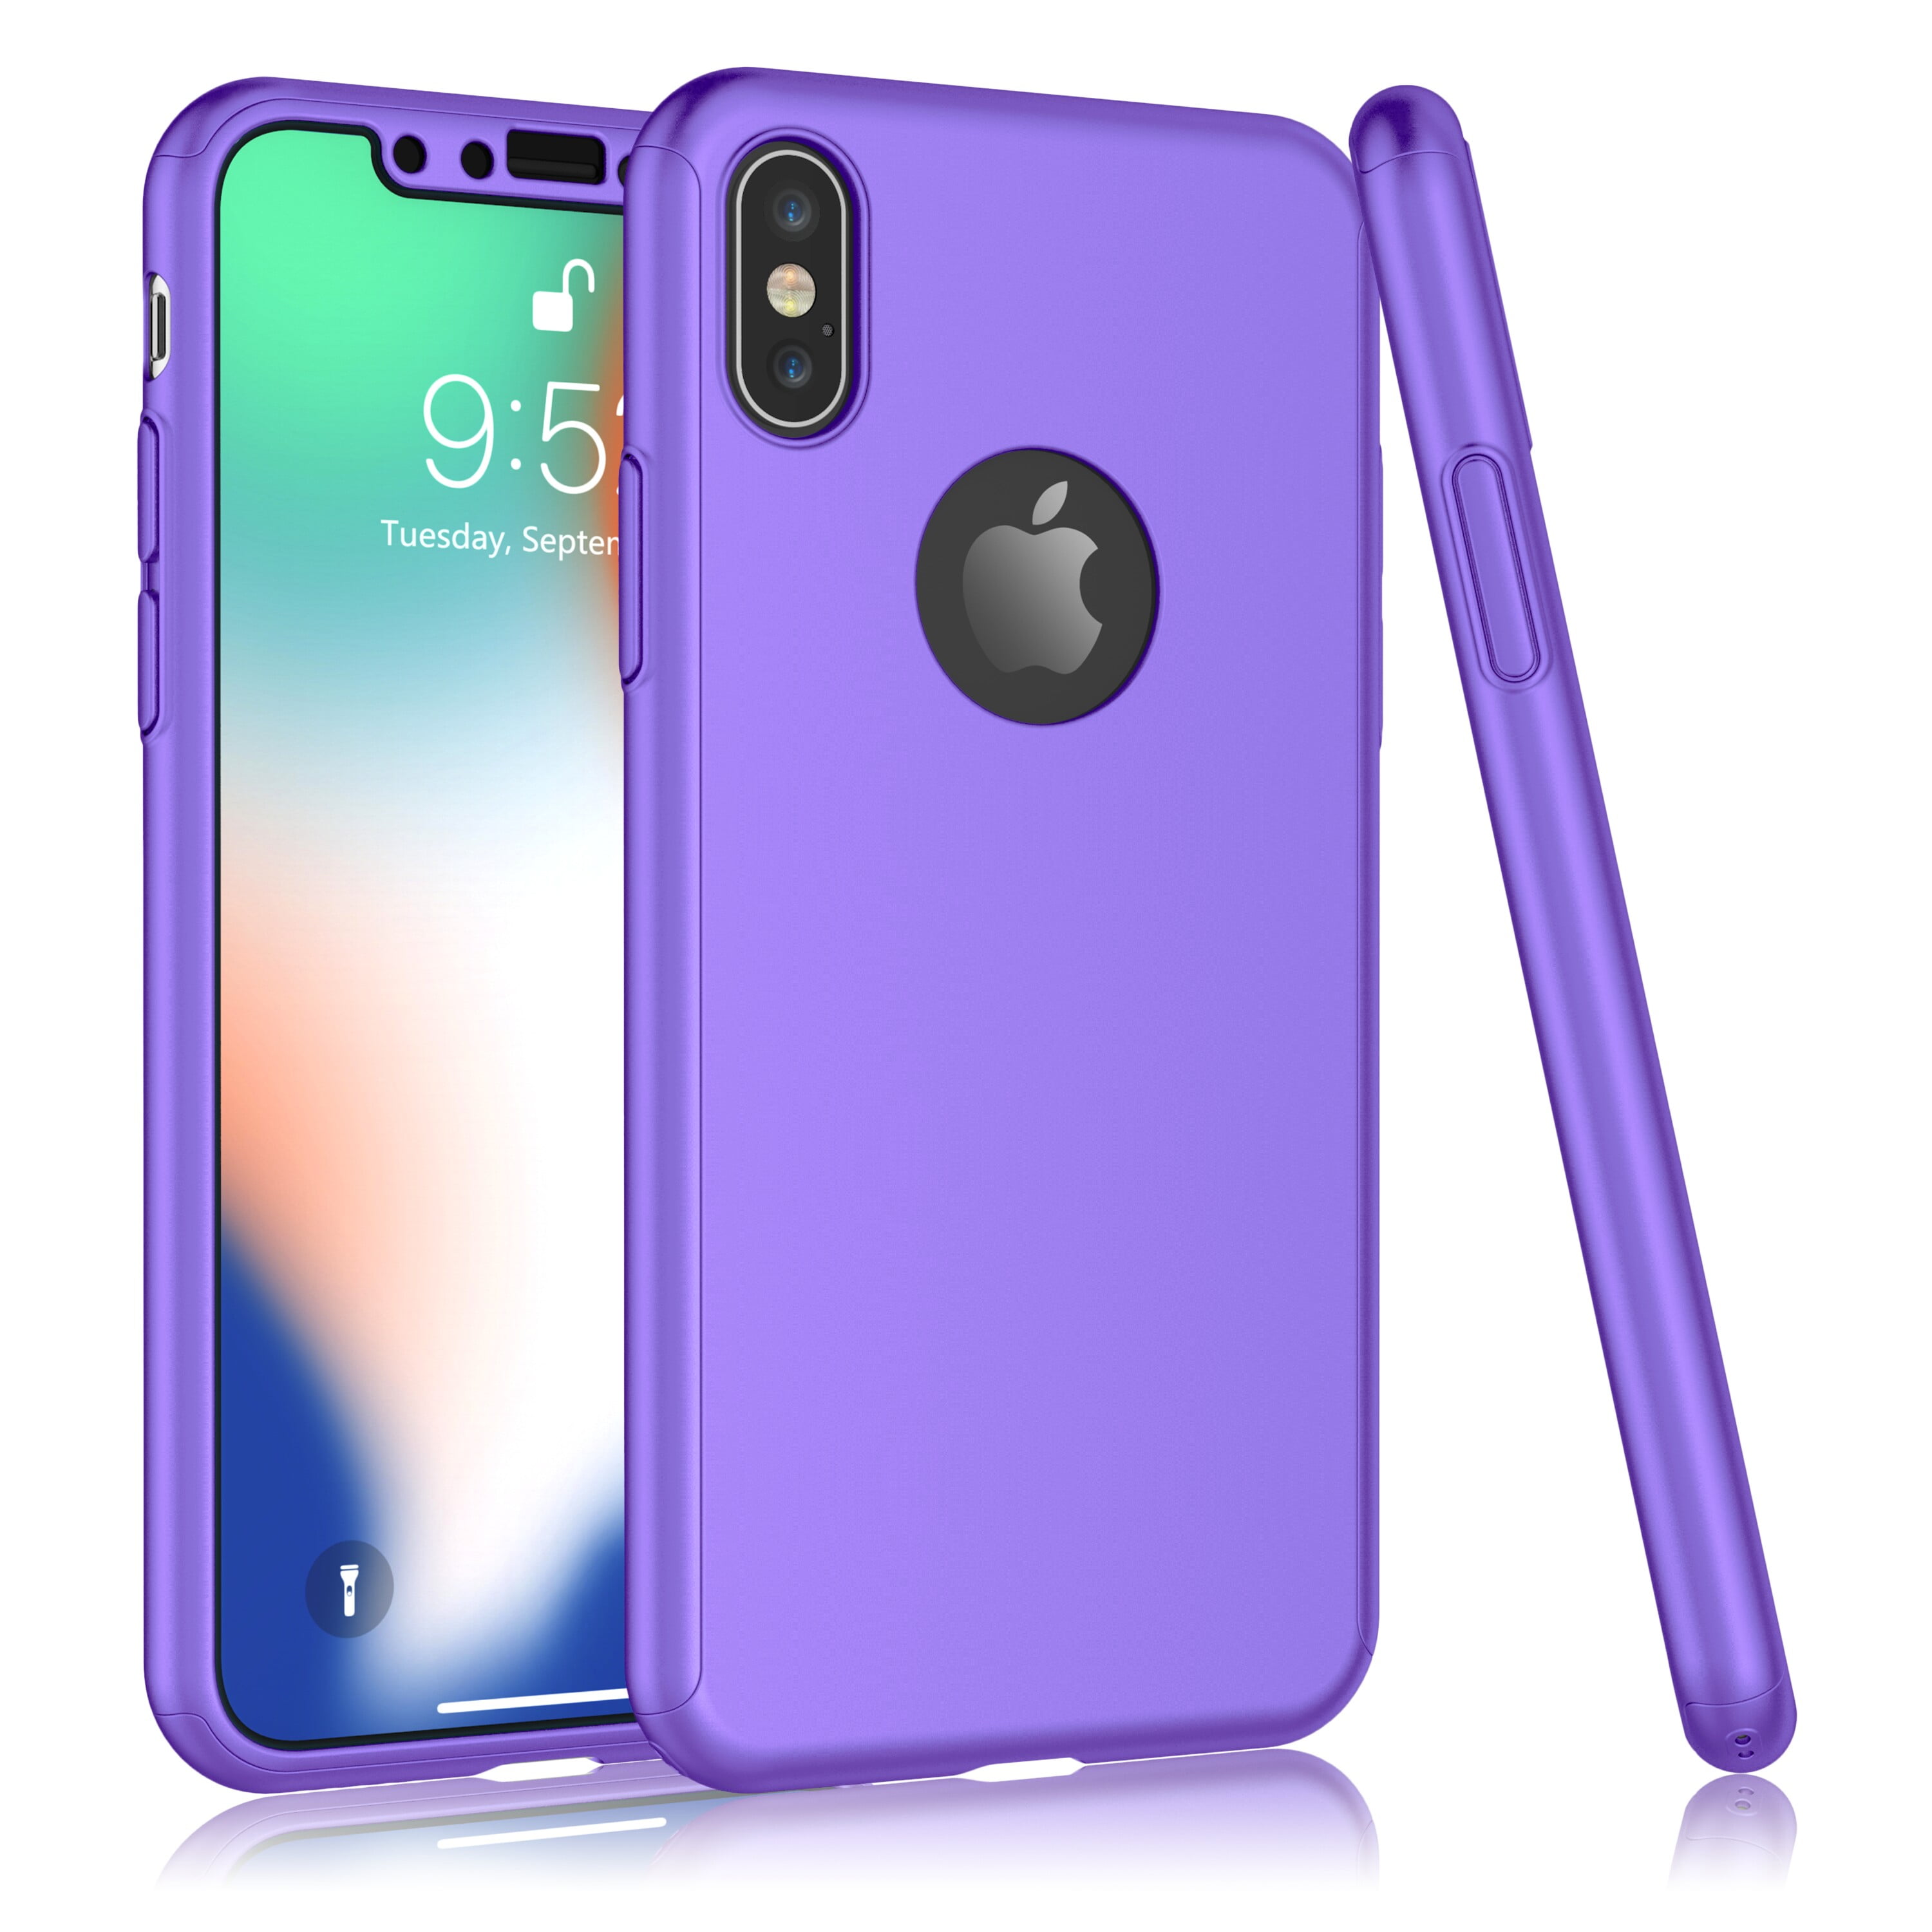 iPhone X/iPhone Xs Case, ImpactStrong Ultra Protective Case with Built-in  Clear Screen Protector Full Body Cover for iPhone X/iPhone Xs (Light Purple)